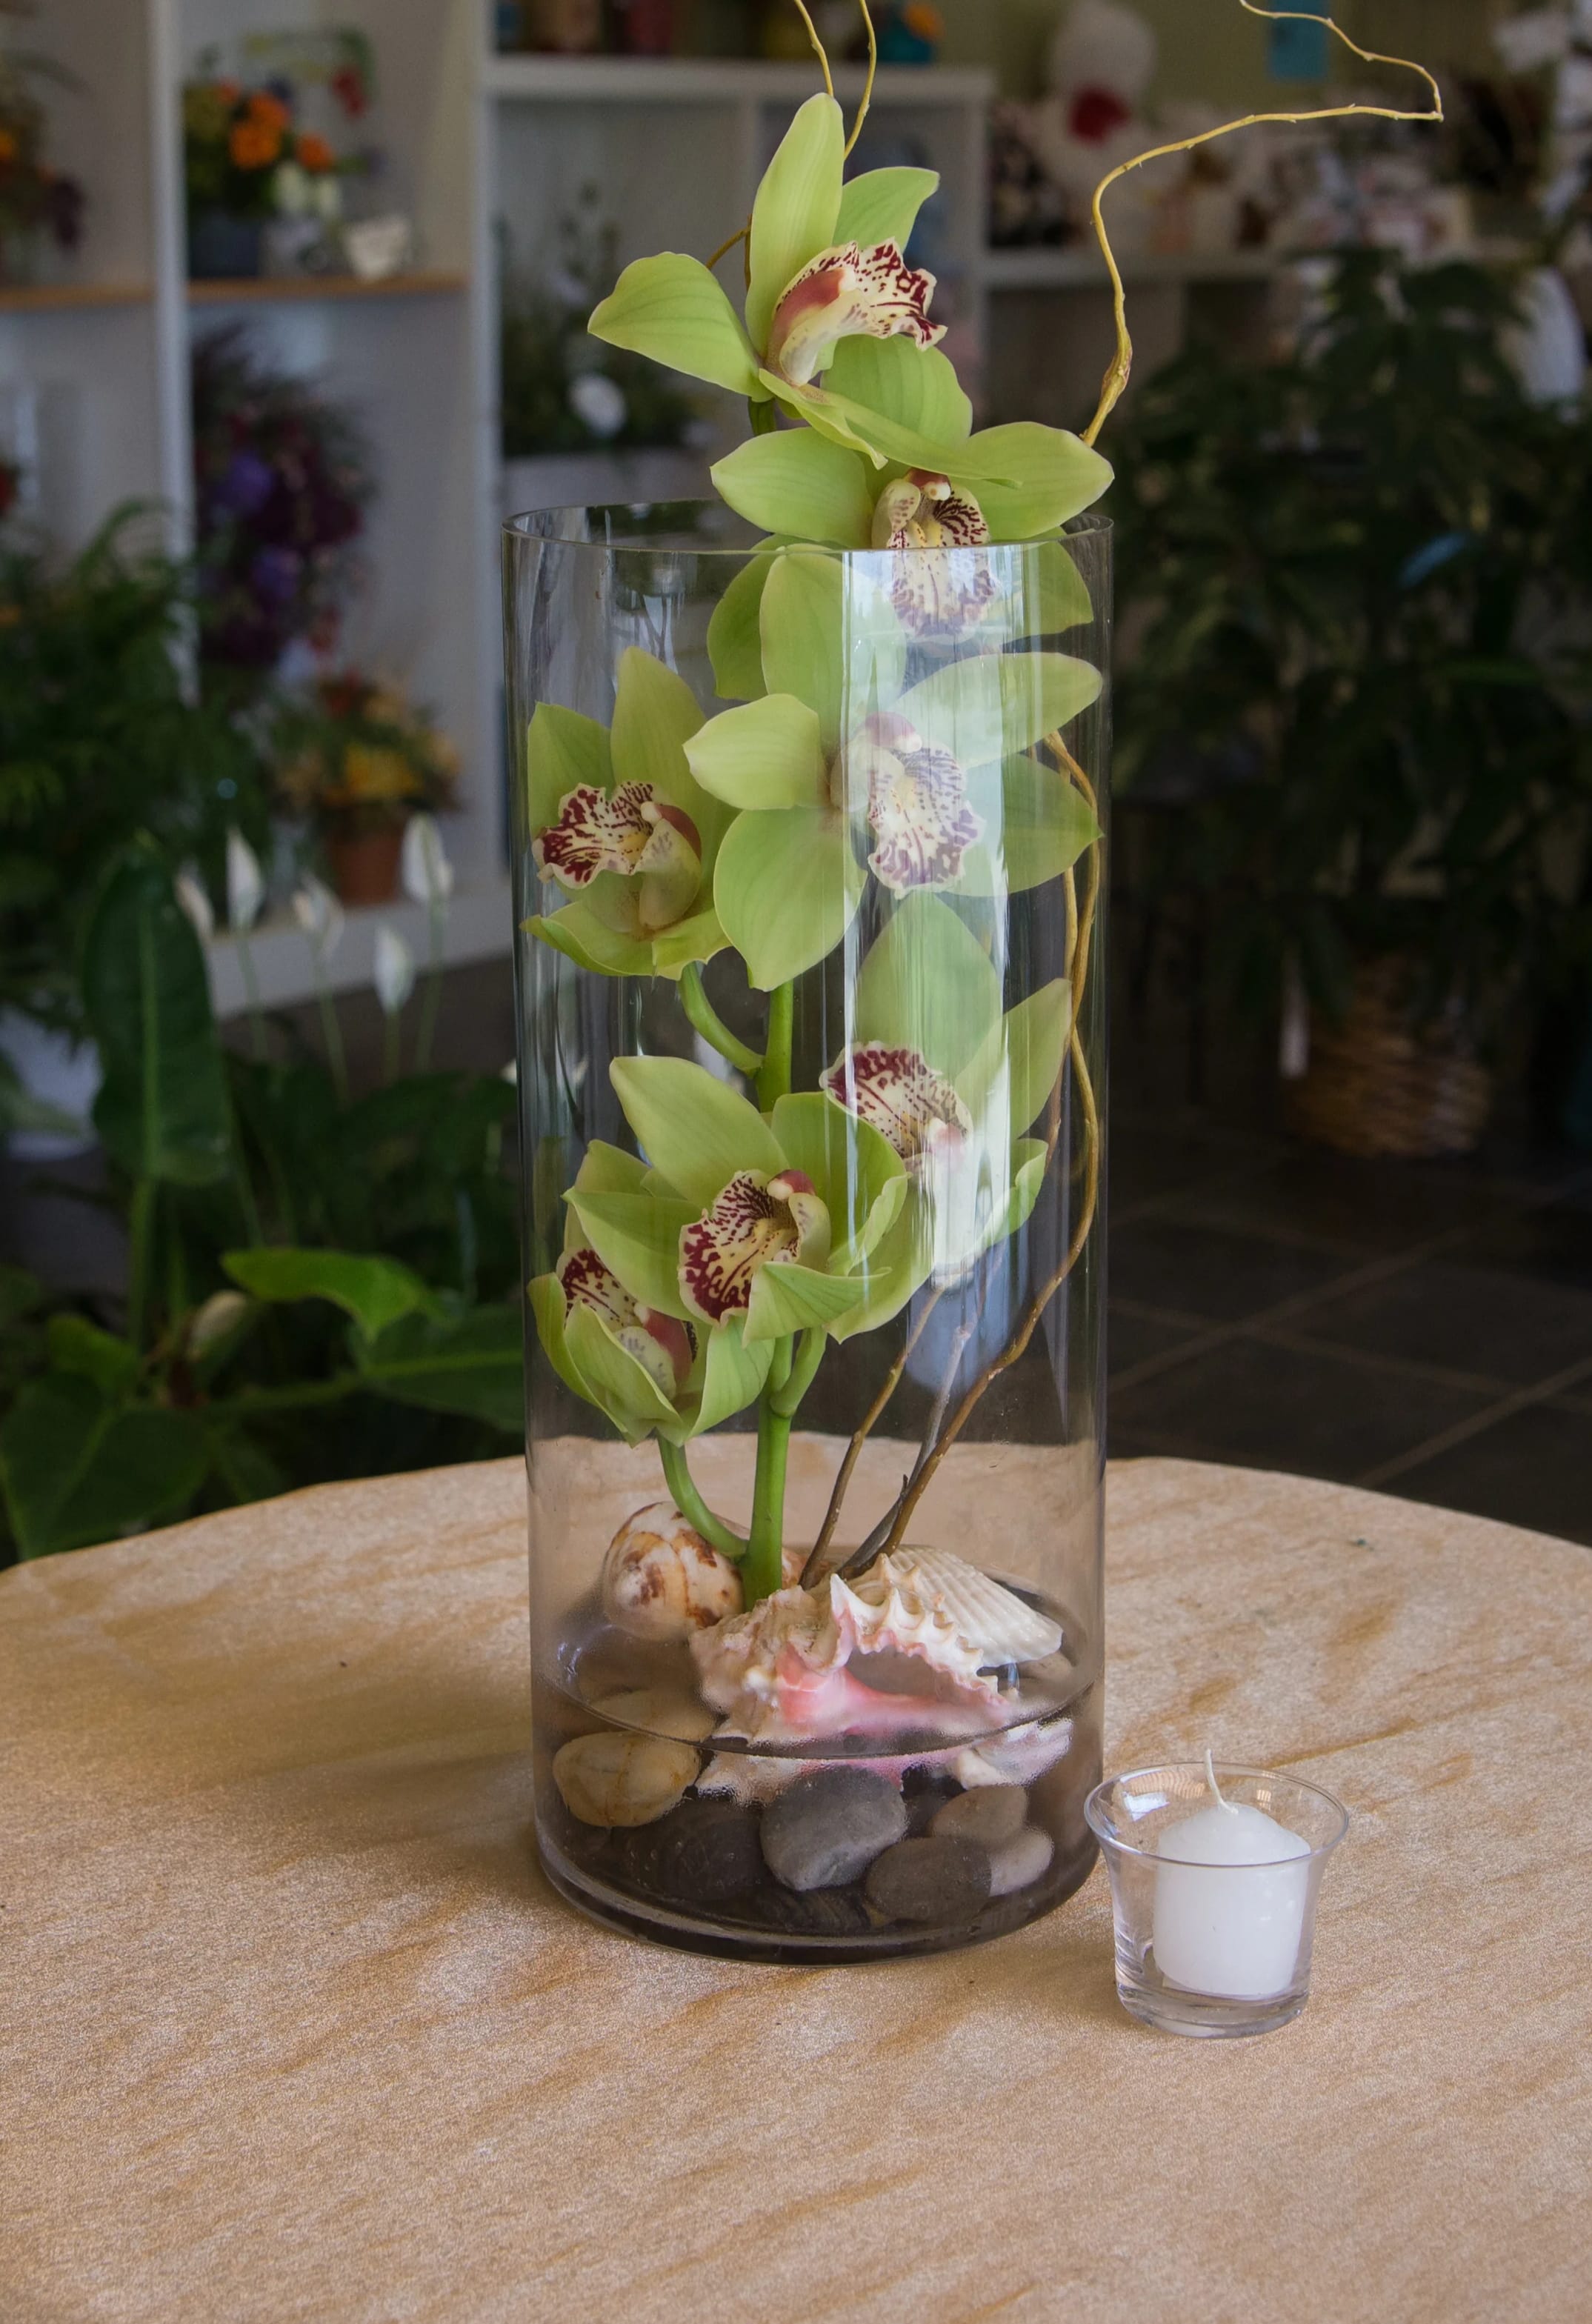 SIMPLY STATED - This cymbidium orchid in a cylinder vase is an elegant gift for any occasion.